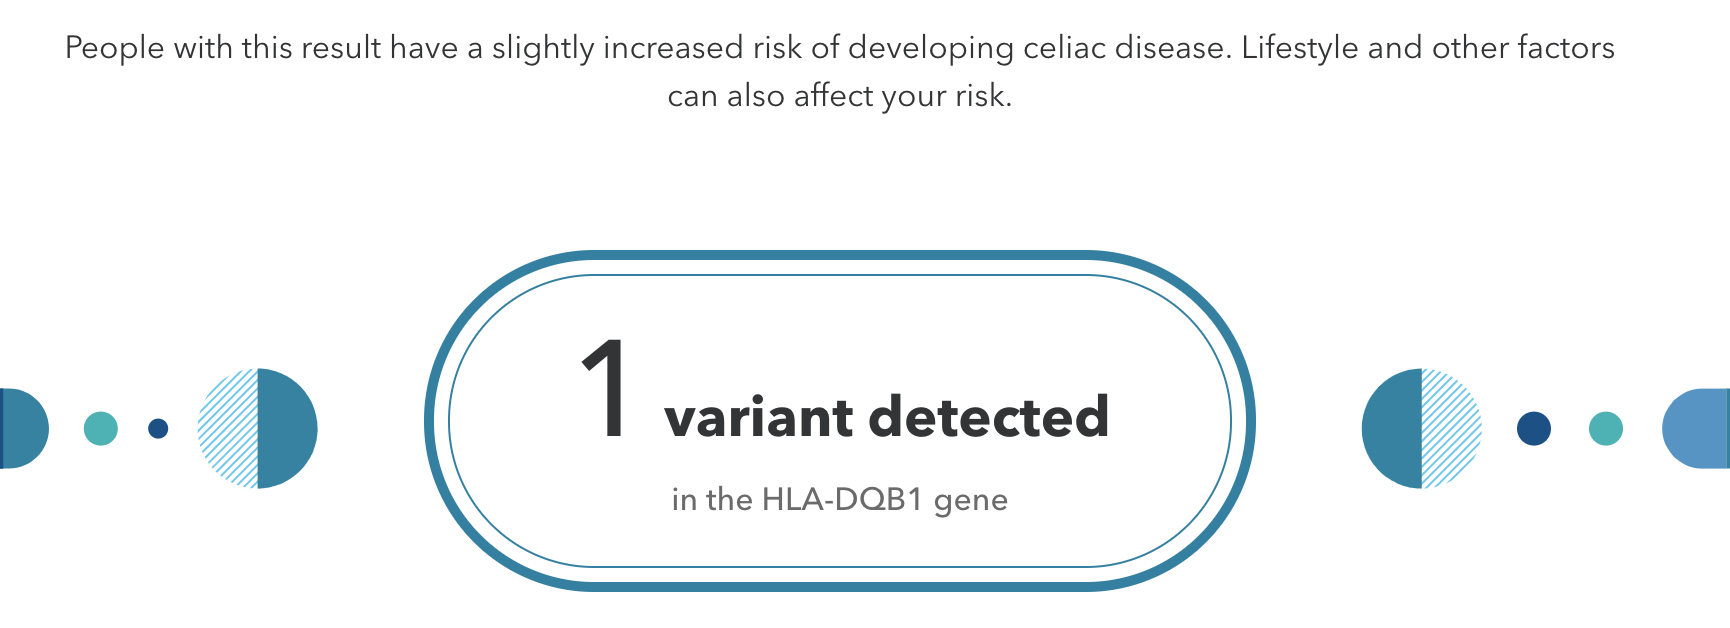 A positive result for a genetic allele associated with an increased risk for celiac disease.